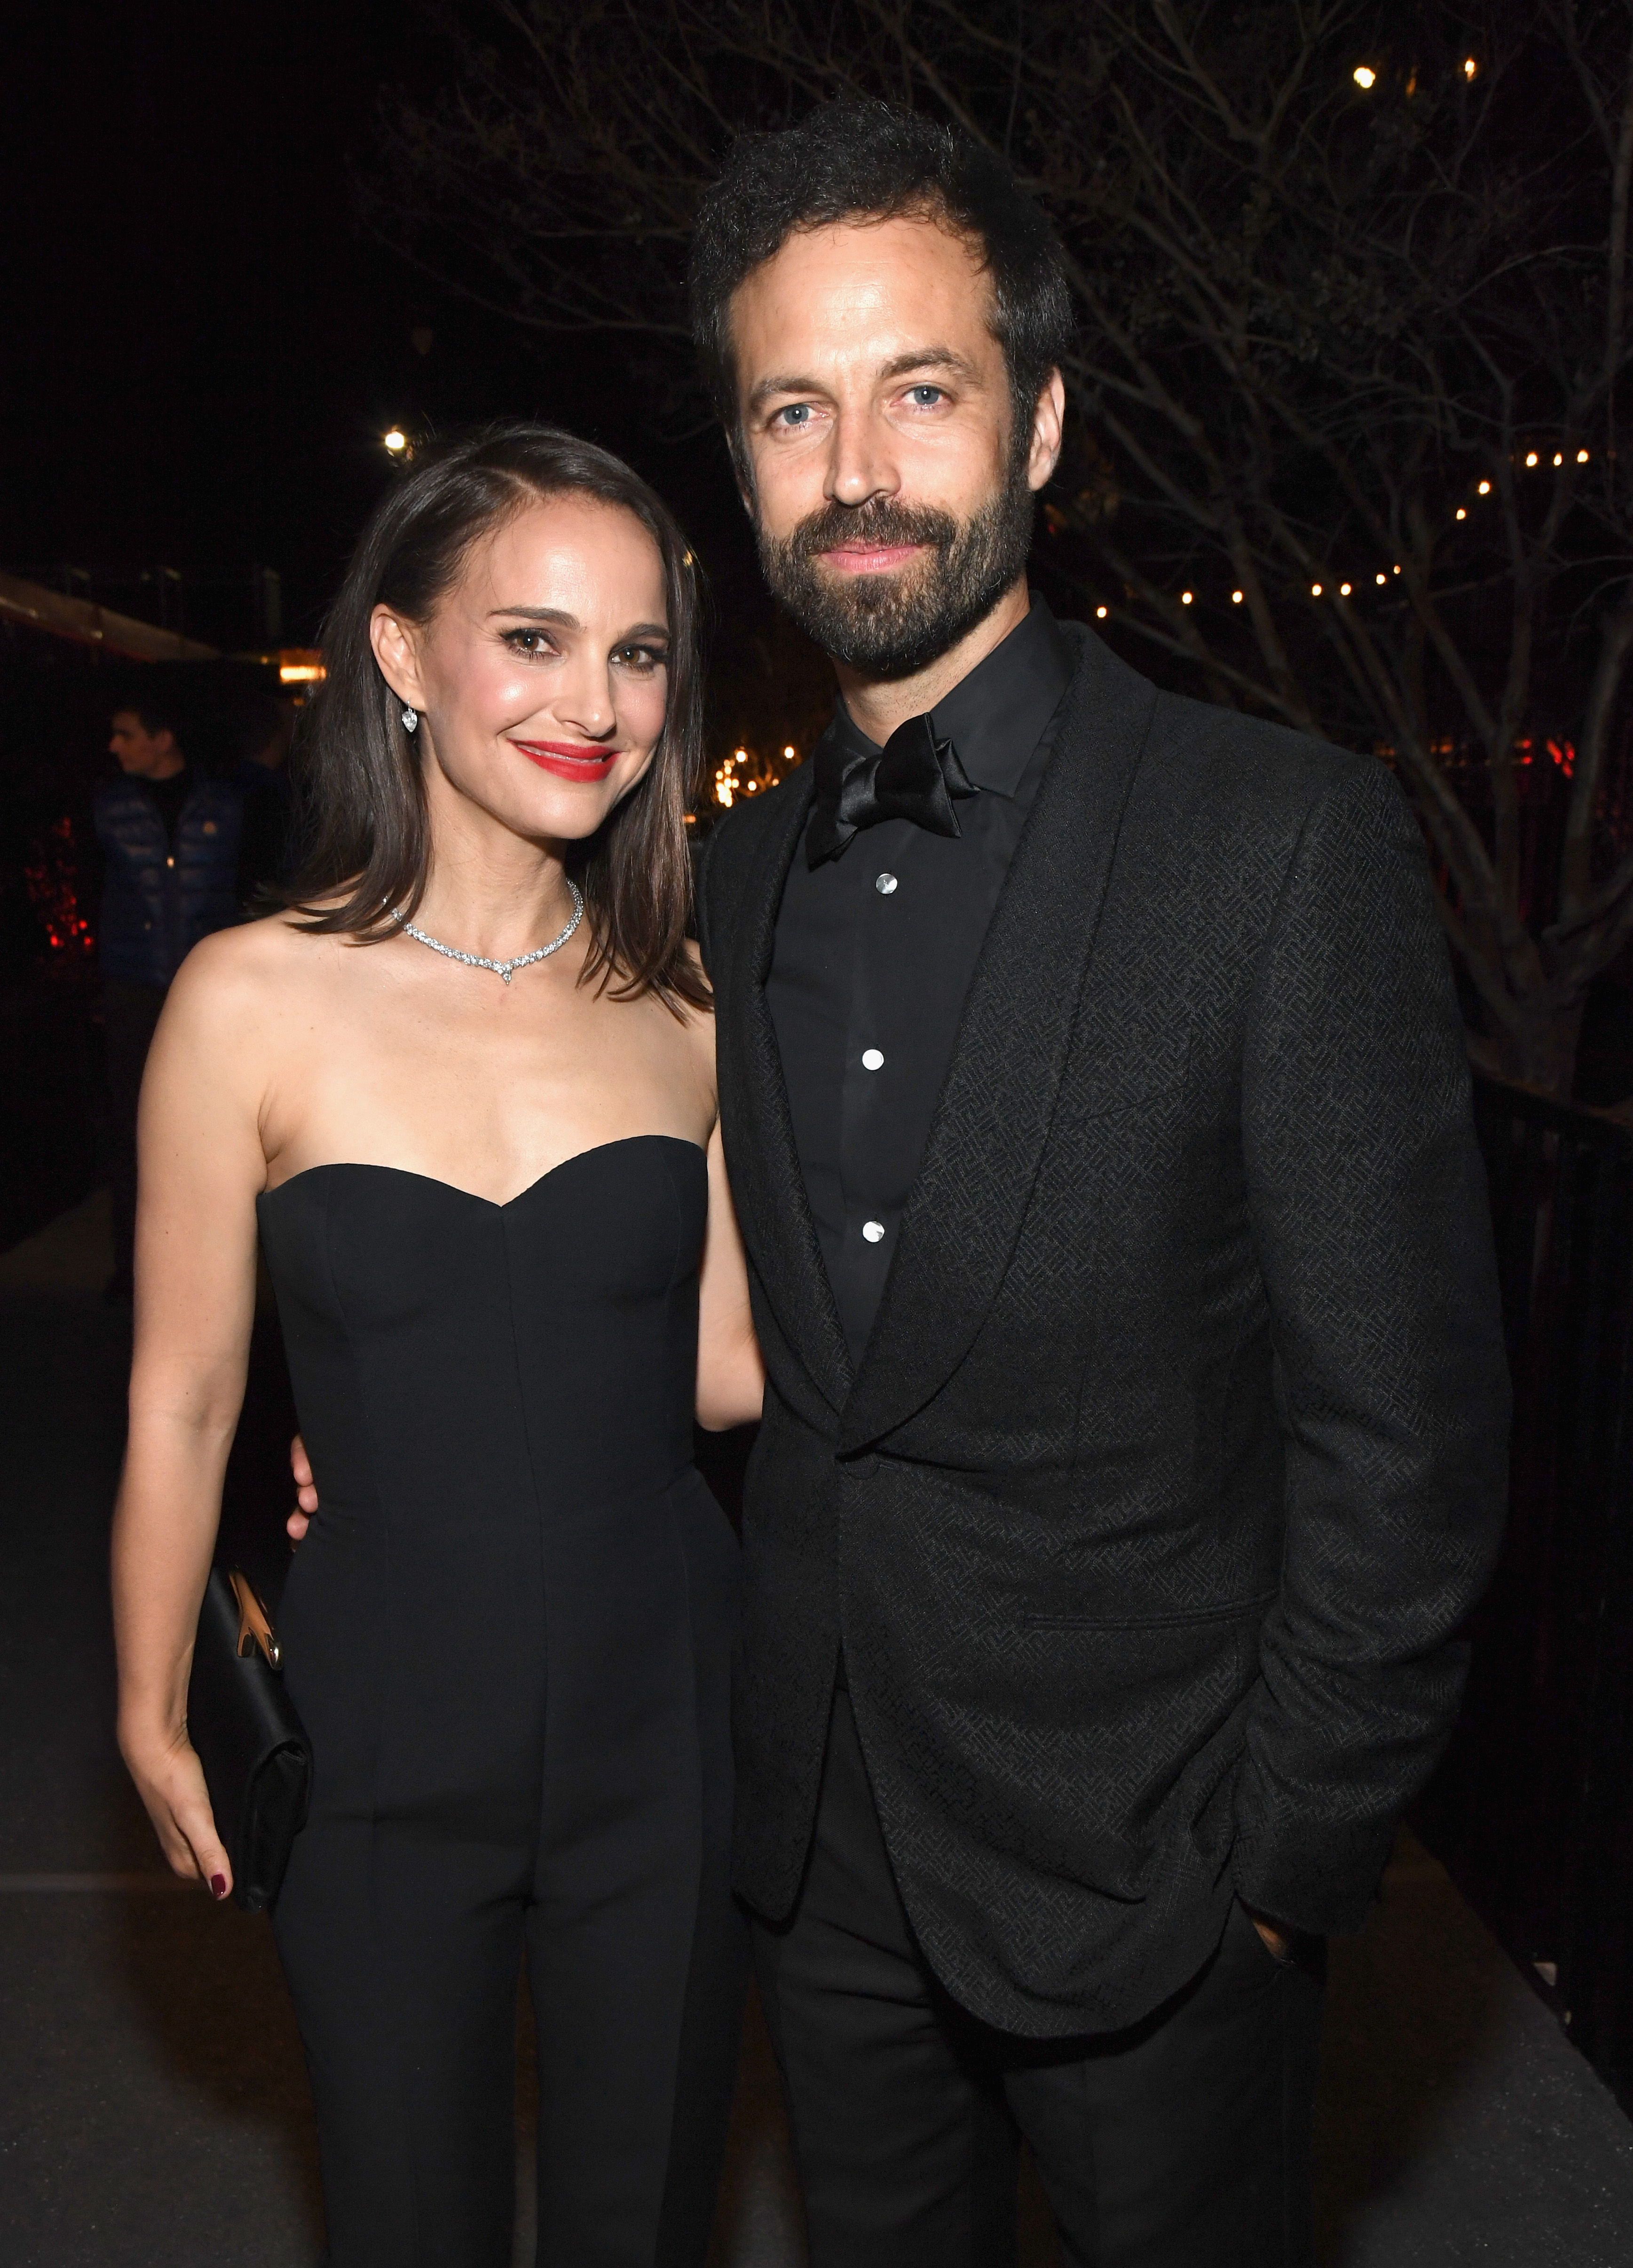 Natalie Portman and Benjamin Millepied in Beverly Hills, California, on February 24, 2019 | Source: Getty Images